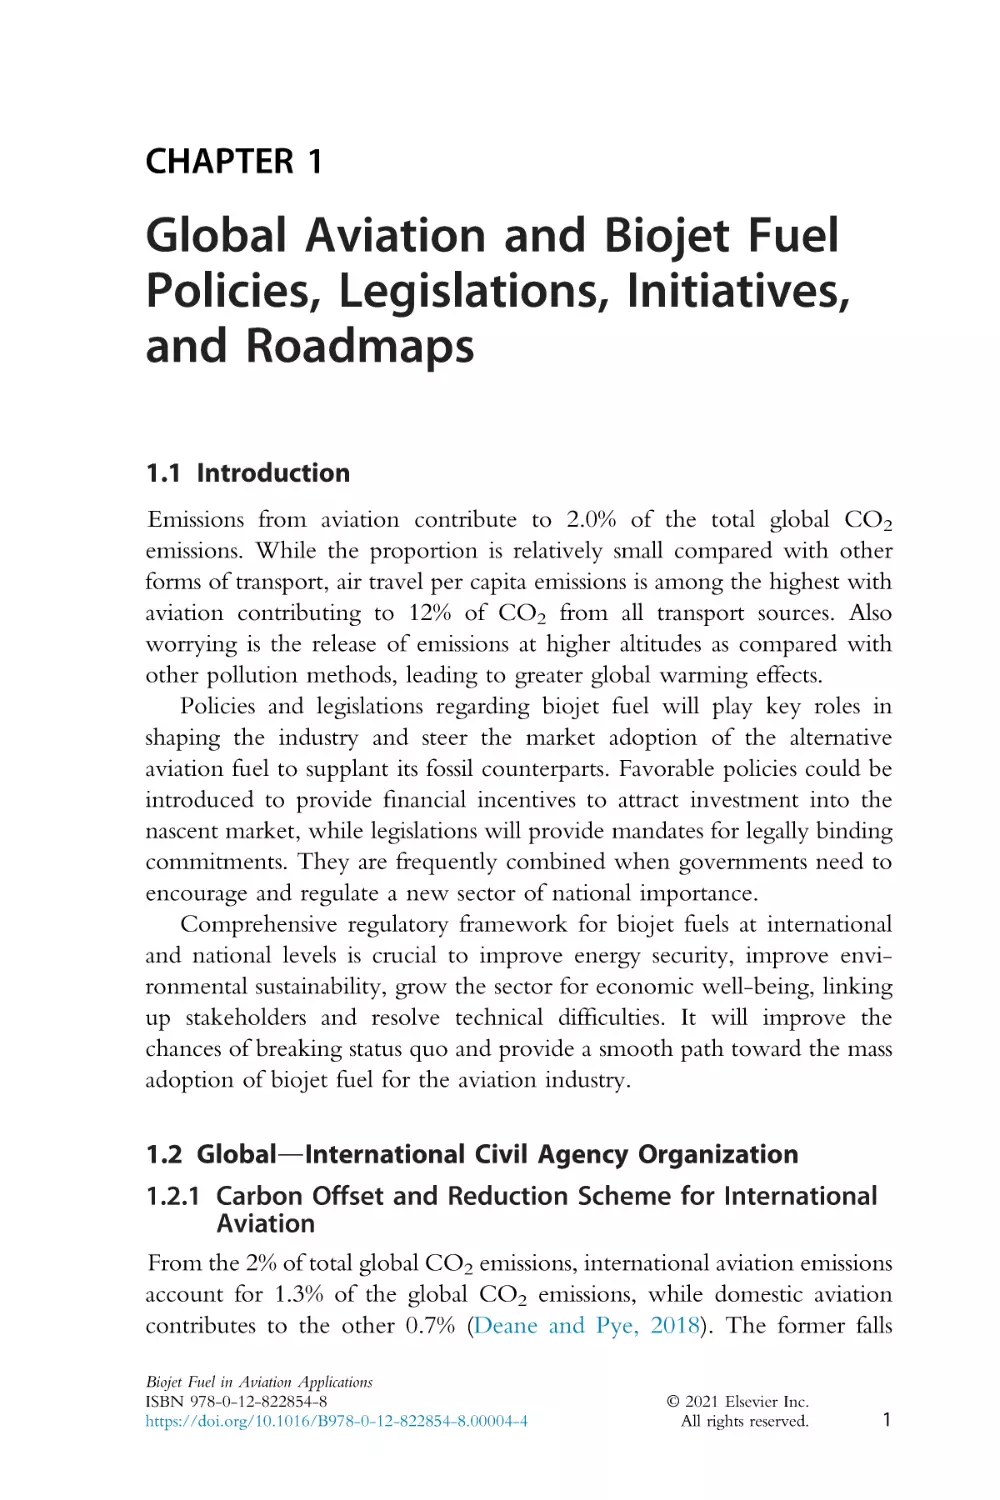 1 - Global Aviation and Biojet Fuel Policies, Legislations, Initiatives, and Roadmaps
1.1 Introduction
1.2 Global—International Civil Agency Organization
1.2.1 Carbon Offset and Reduction Scheme for International Aviation